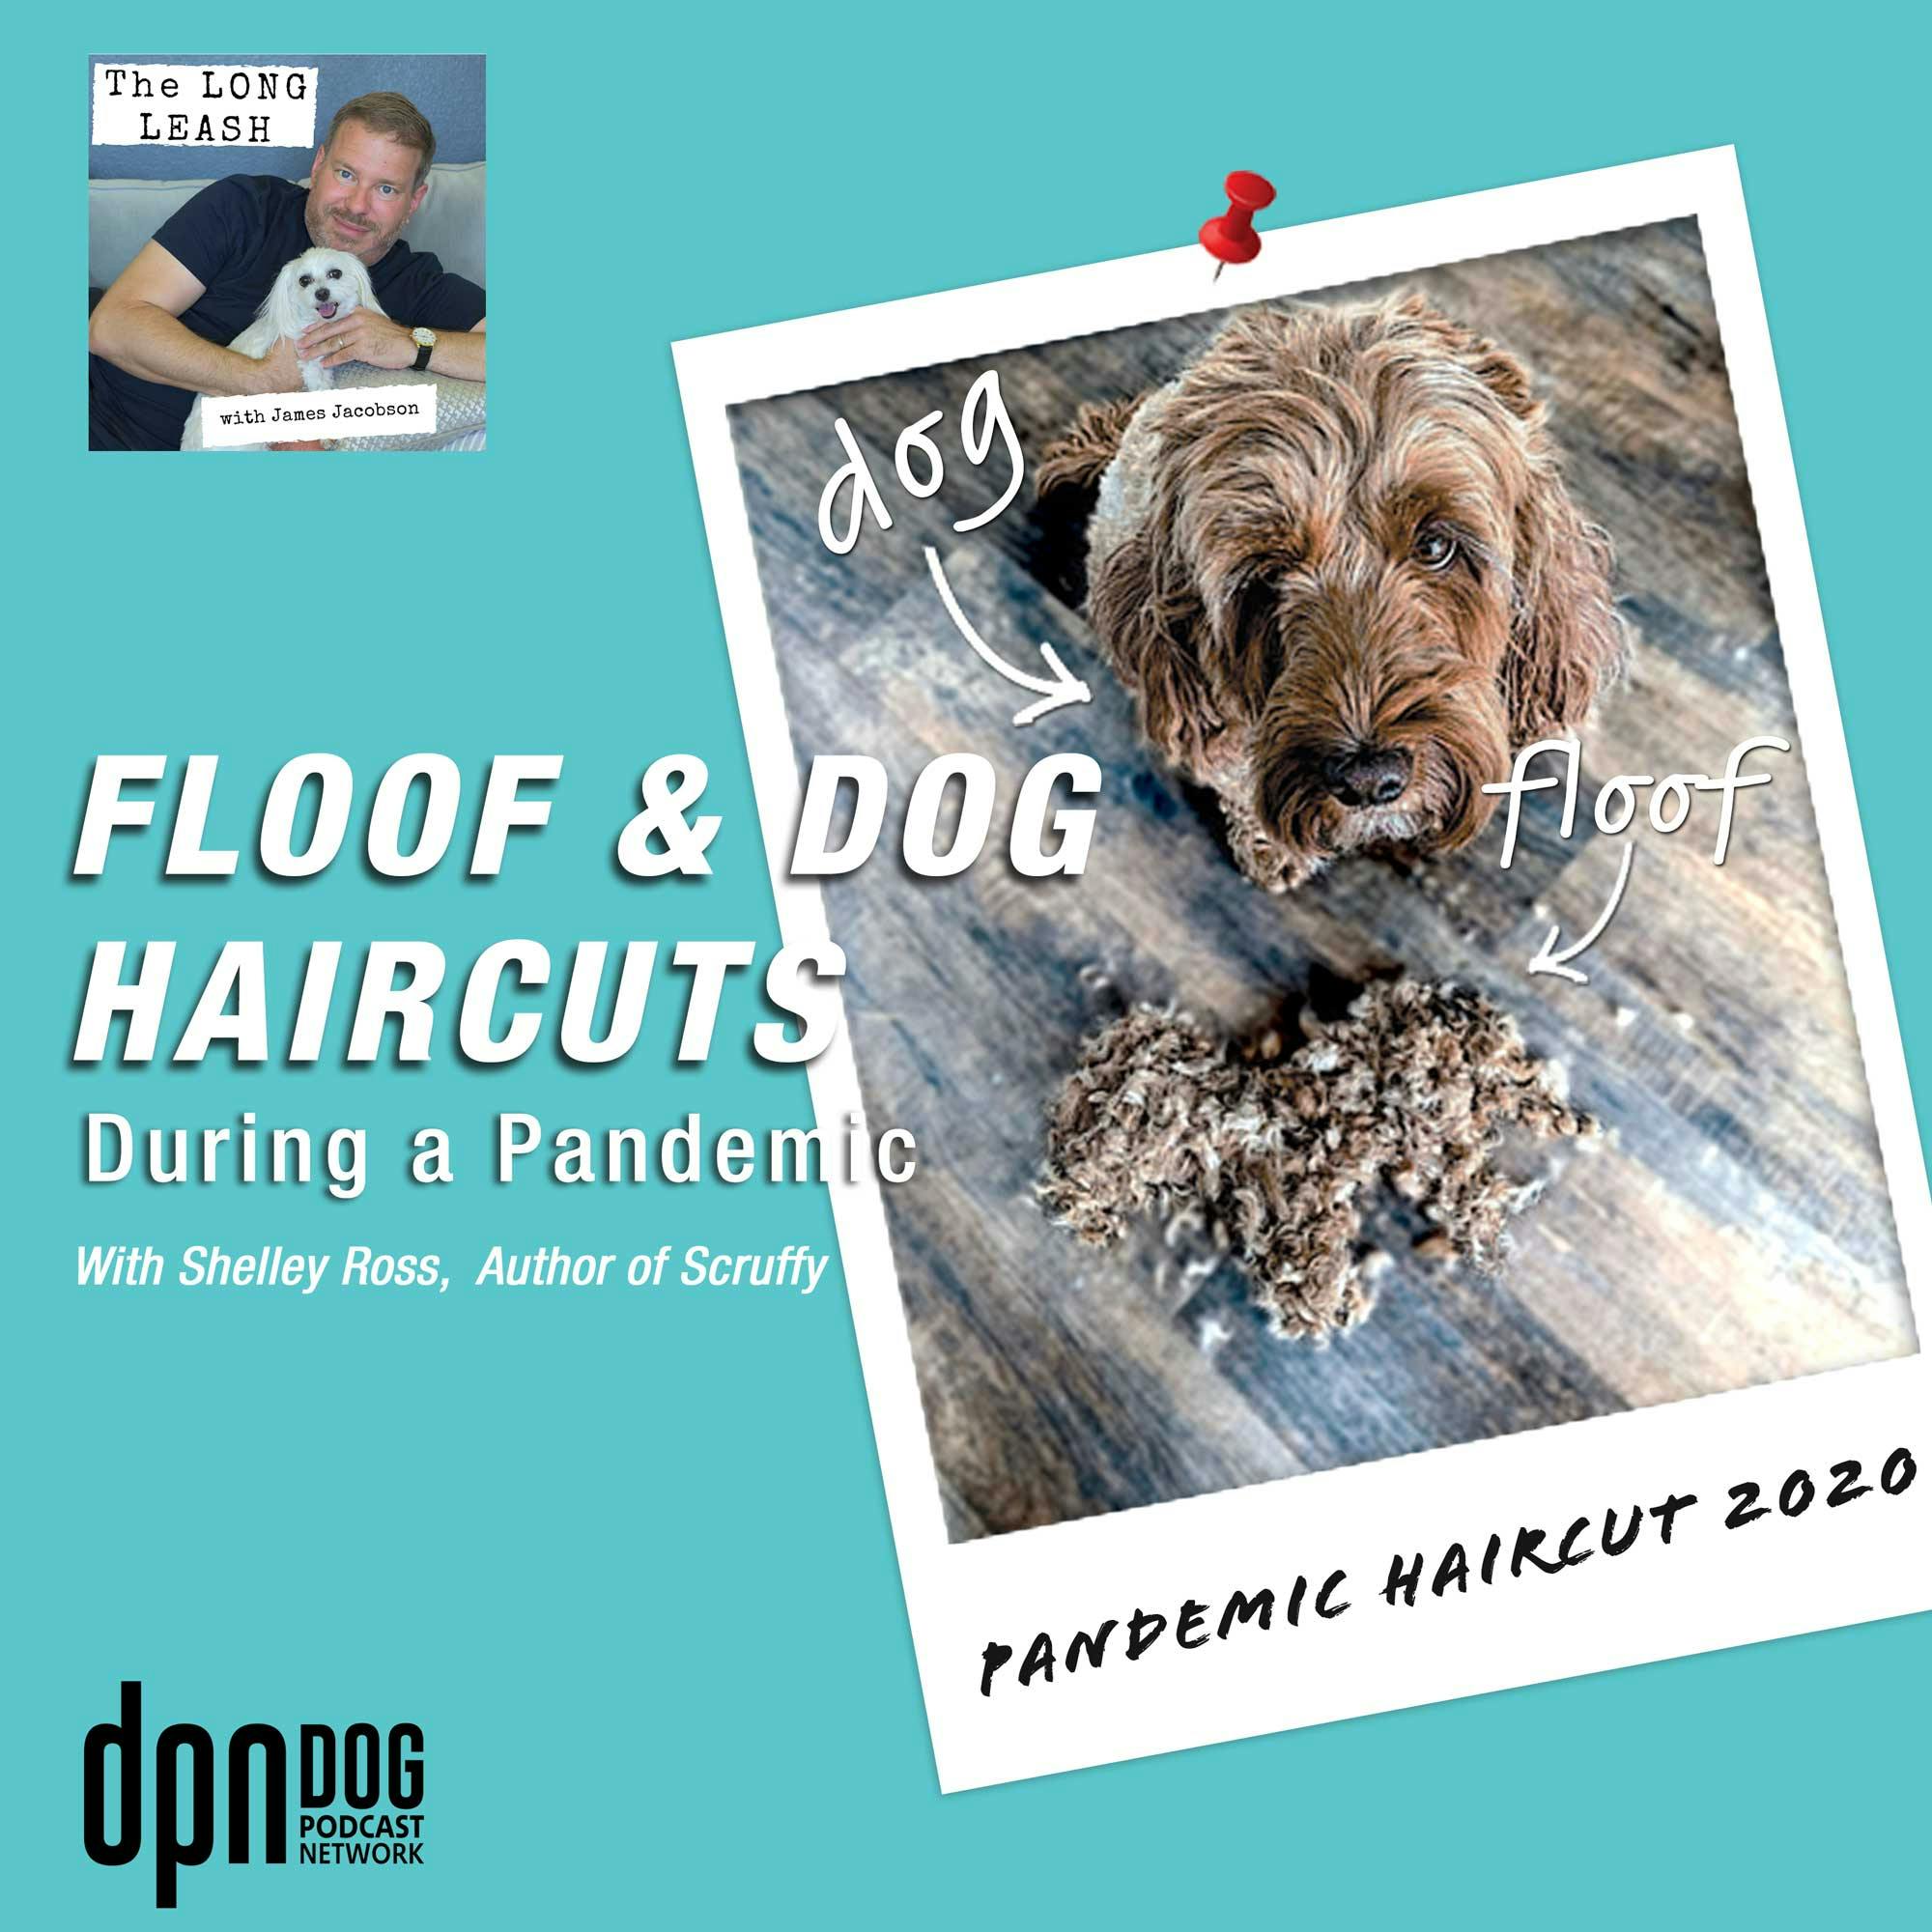 Floof & Dog Haircuts During a Pandemic | The Long Leash | The Long Leash  with James Jacobson